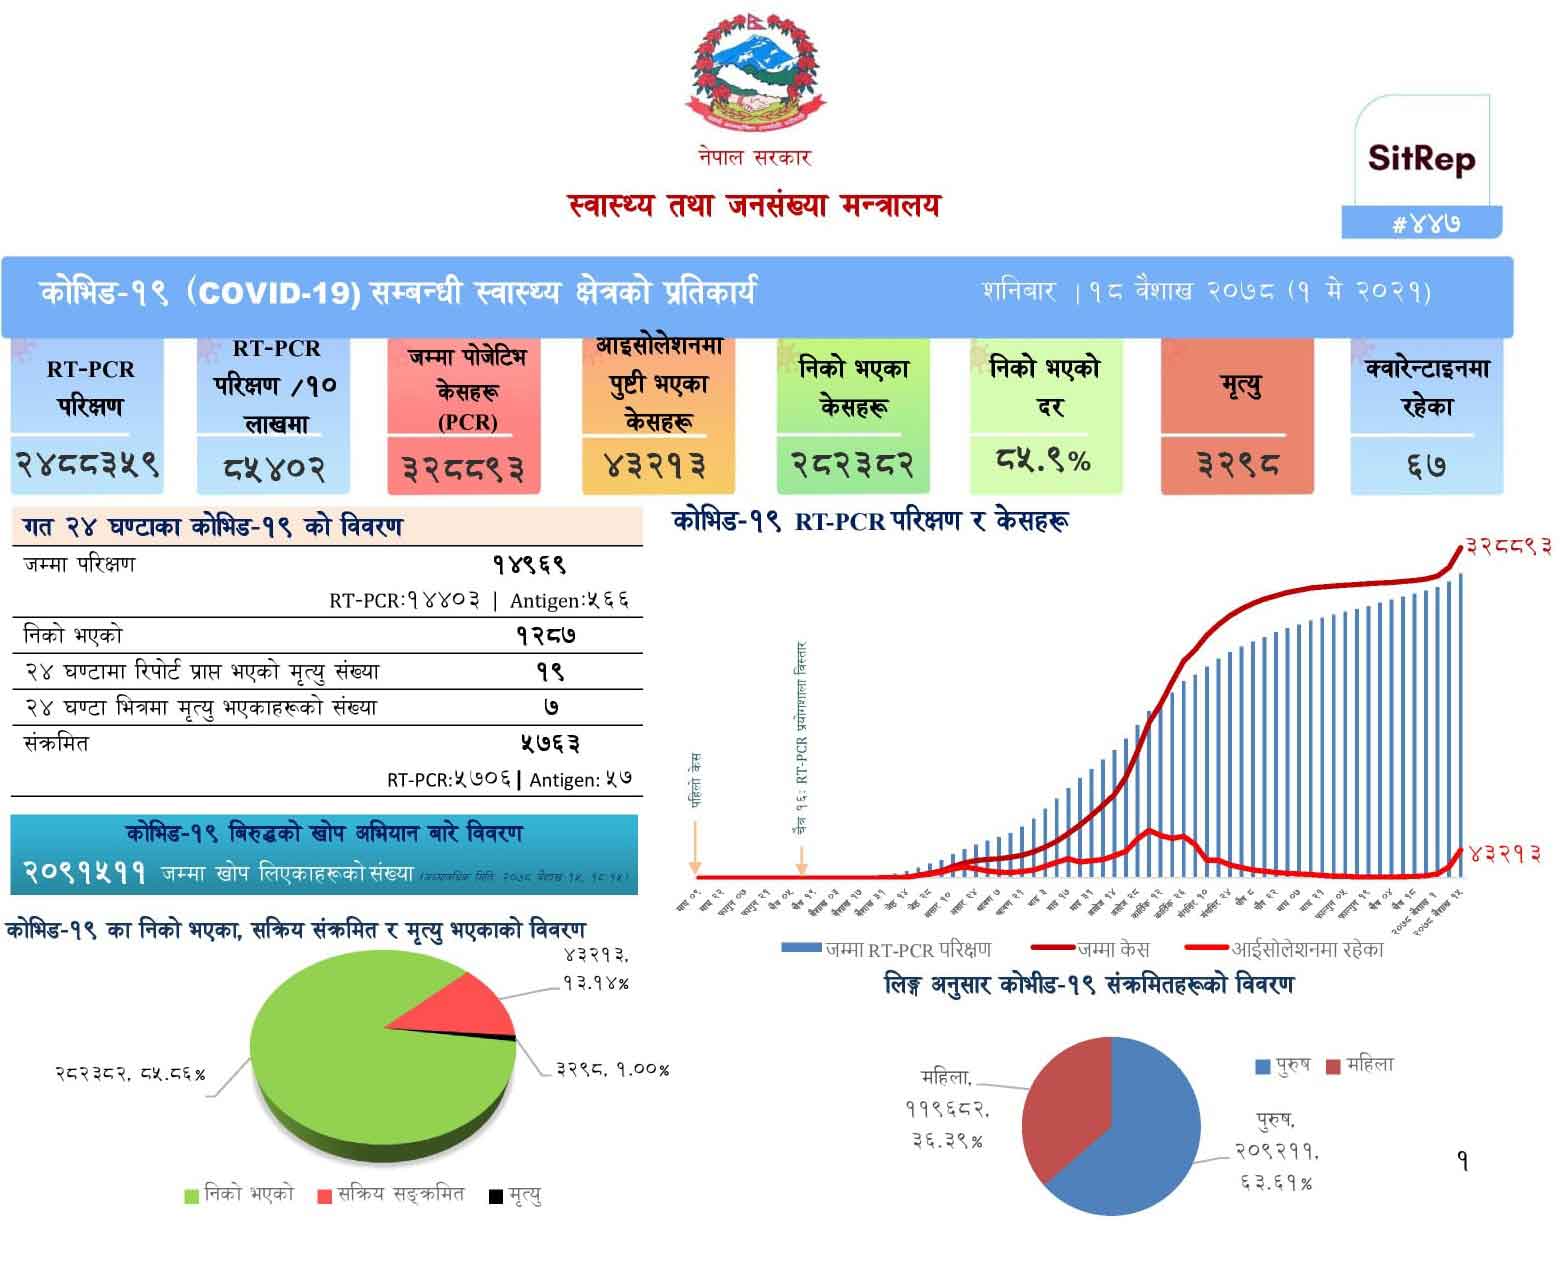 Nepal Covid-19 Update 5763 New Cases and 19 Deaths In the Last 24 Hours